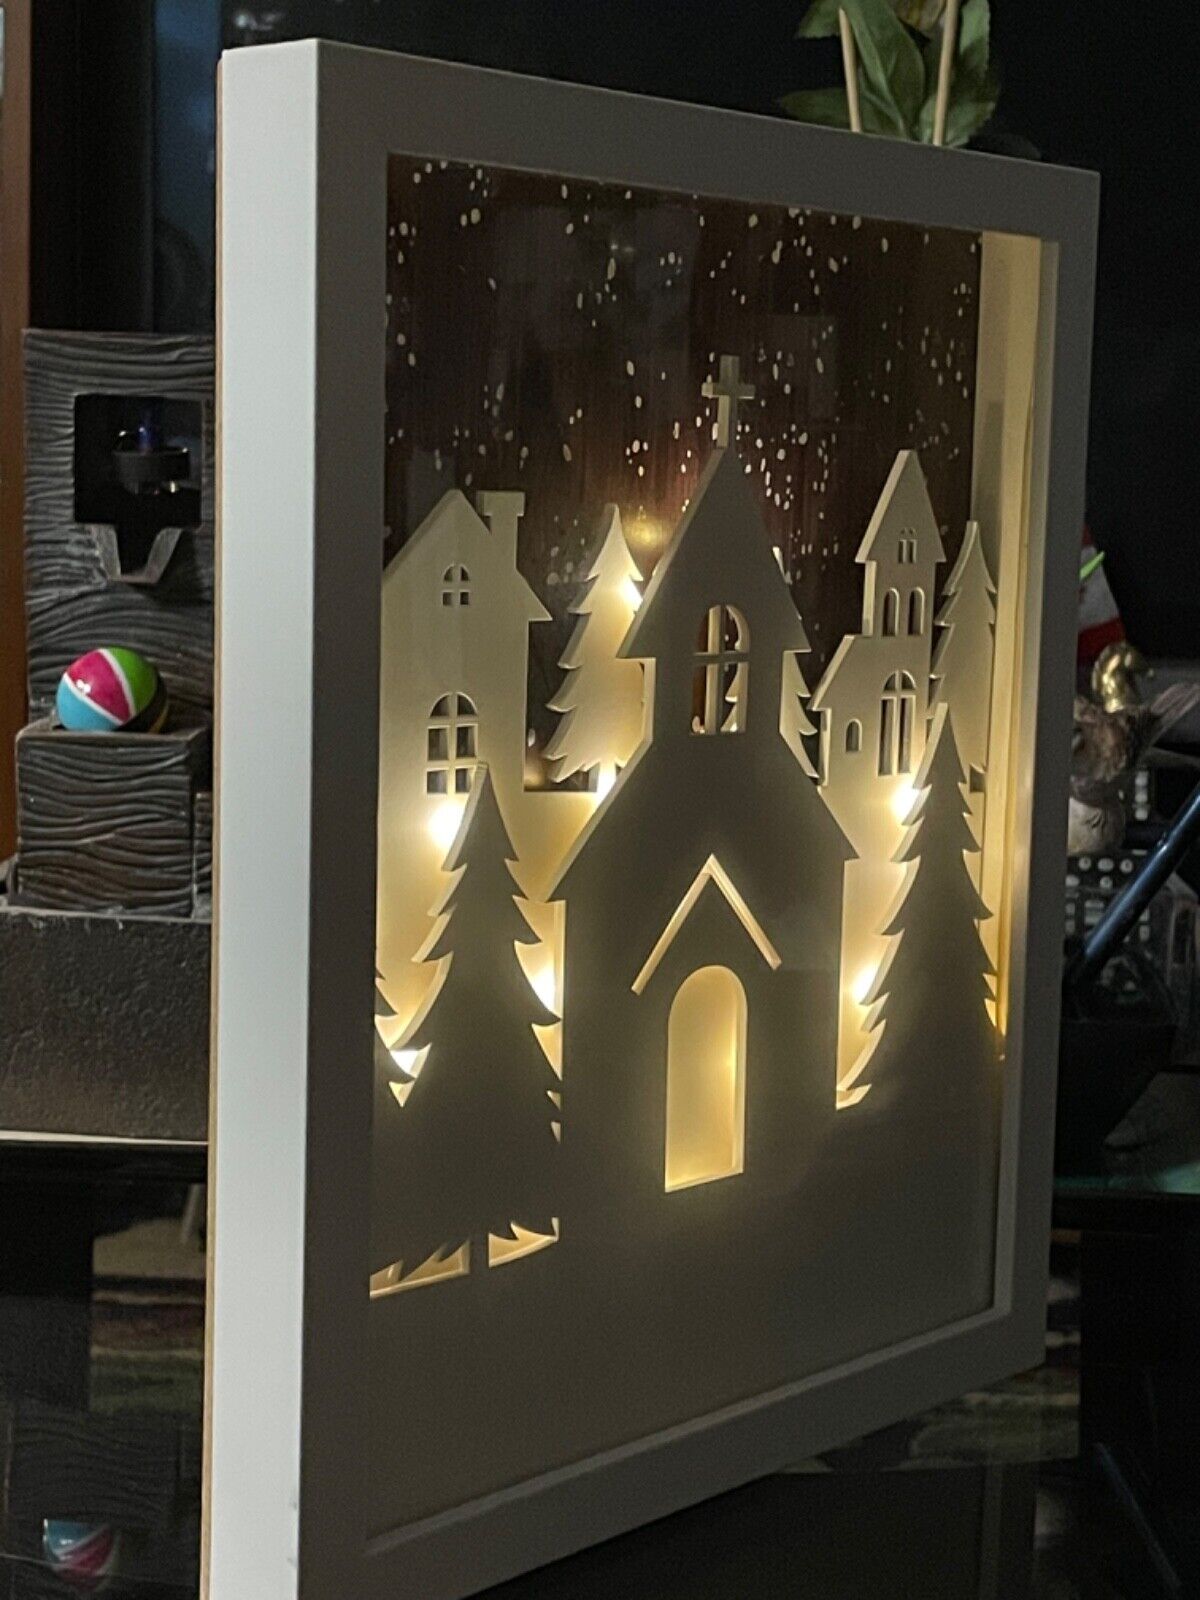 CHRISTMAS “ LED SHADOW BOX “ 2AA BATTERIES  OPERATED // H.13” x W. 11”x Thick.1.